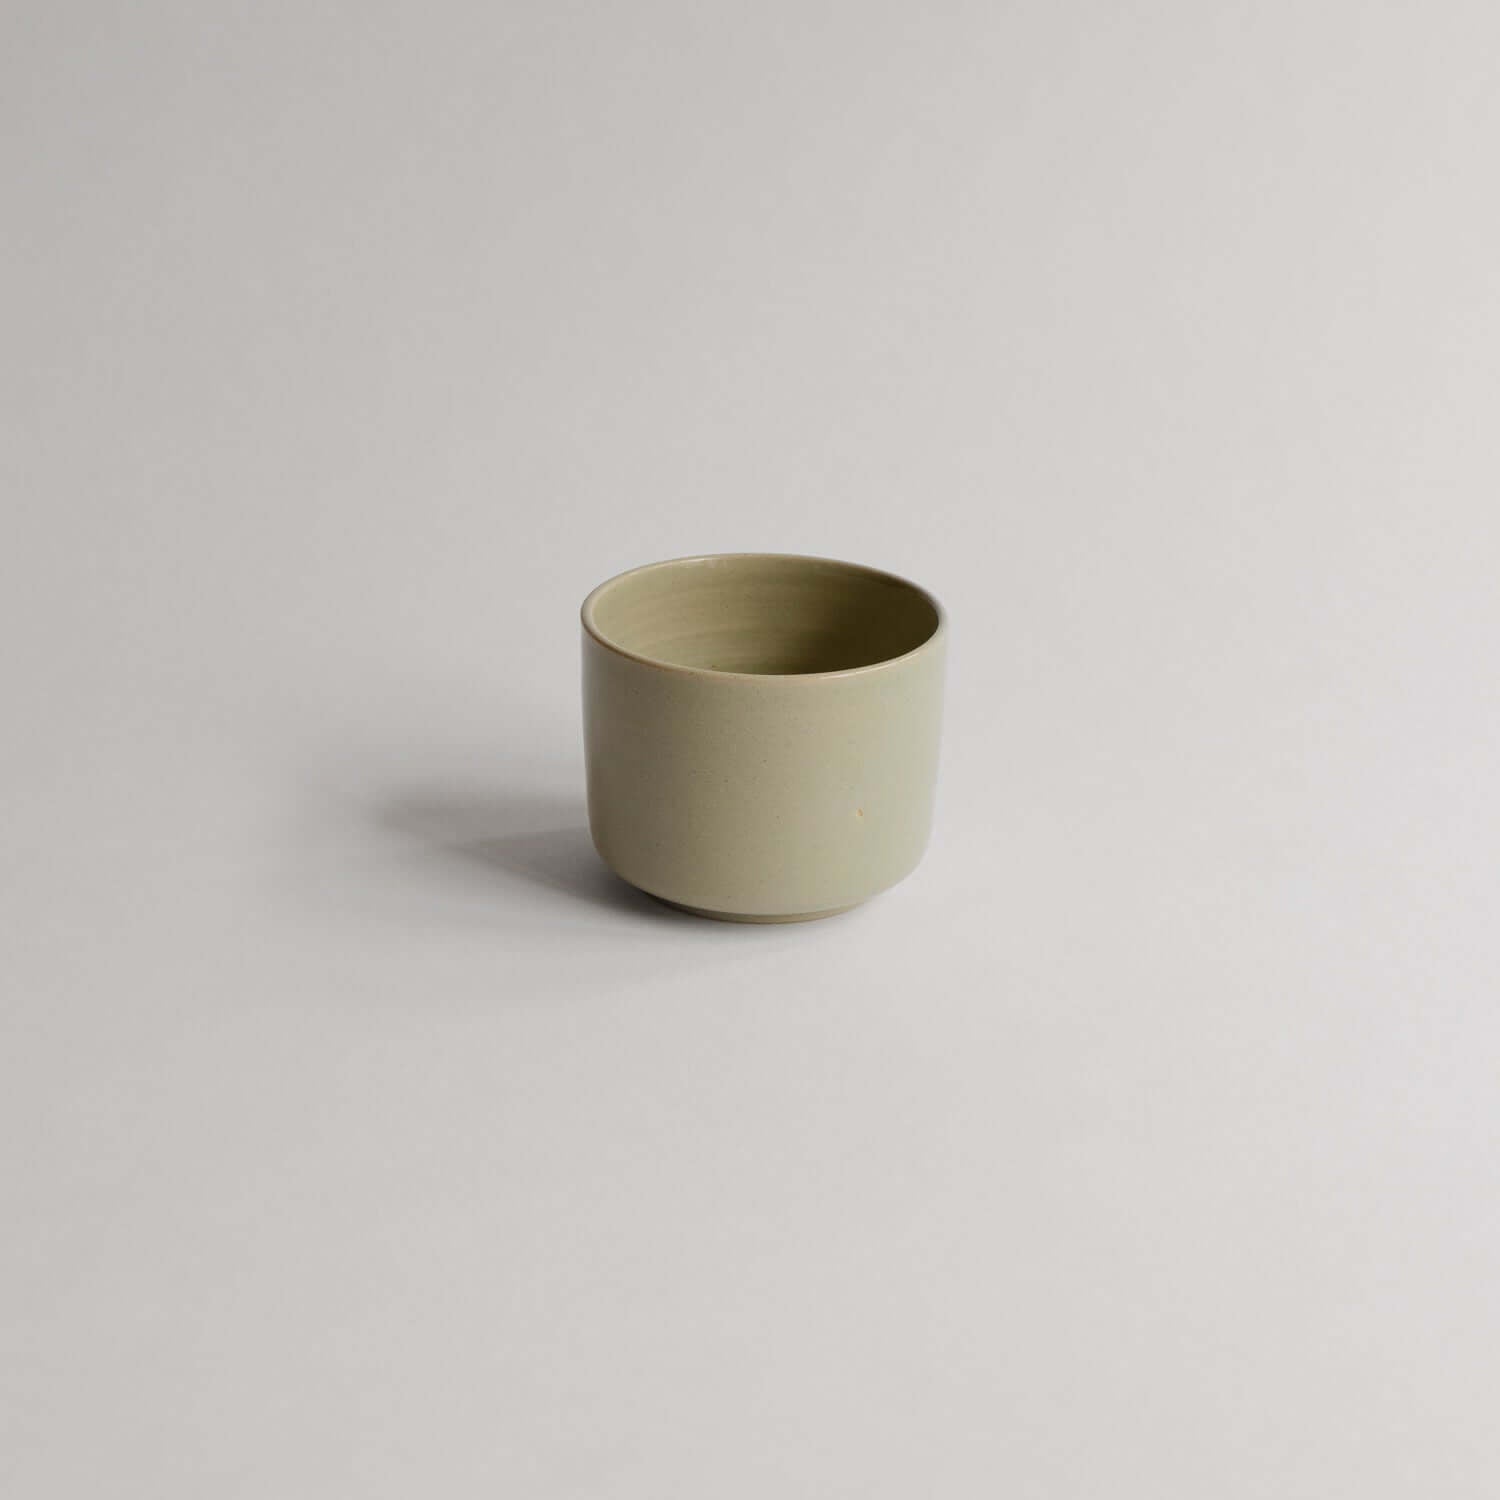 Elevate your coffee ritual with the Nomi Set - including creme, Pepe & moss cups. Unique, handmade stoneware with a touch of artisanship. von viola beuscher ceramics